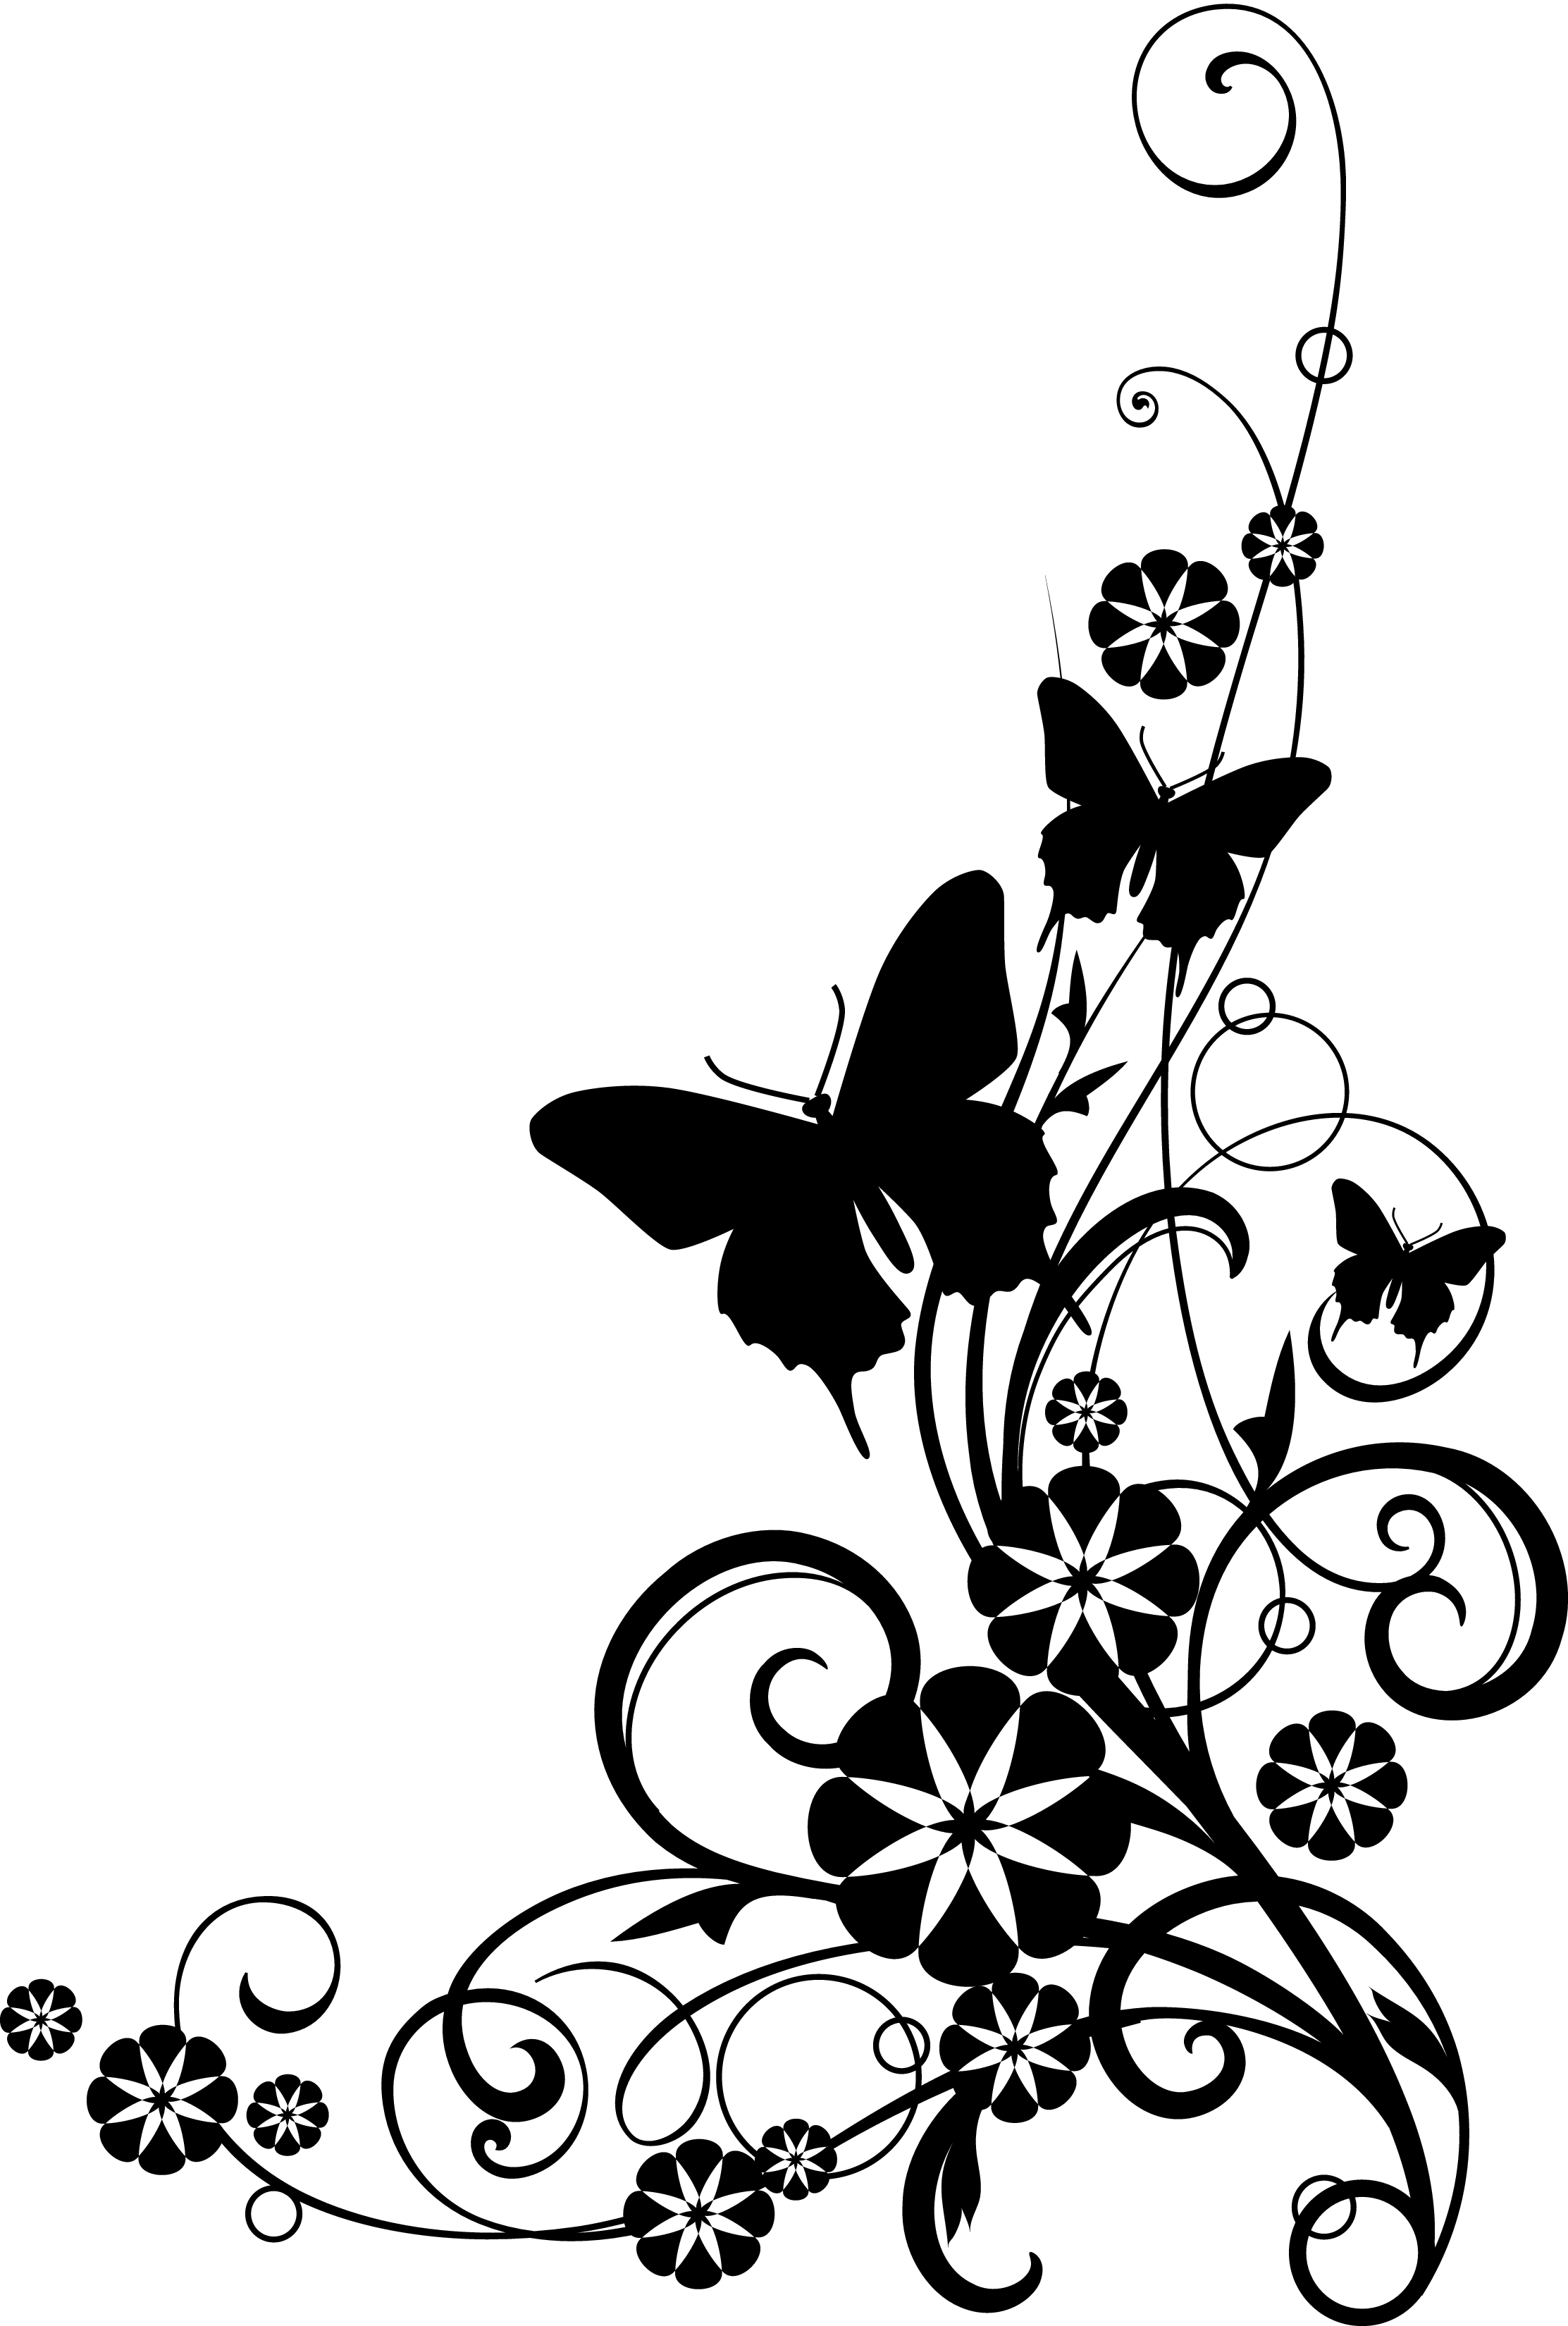 Black And White Wedding Border Clipart - Gallery